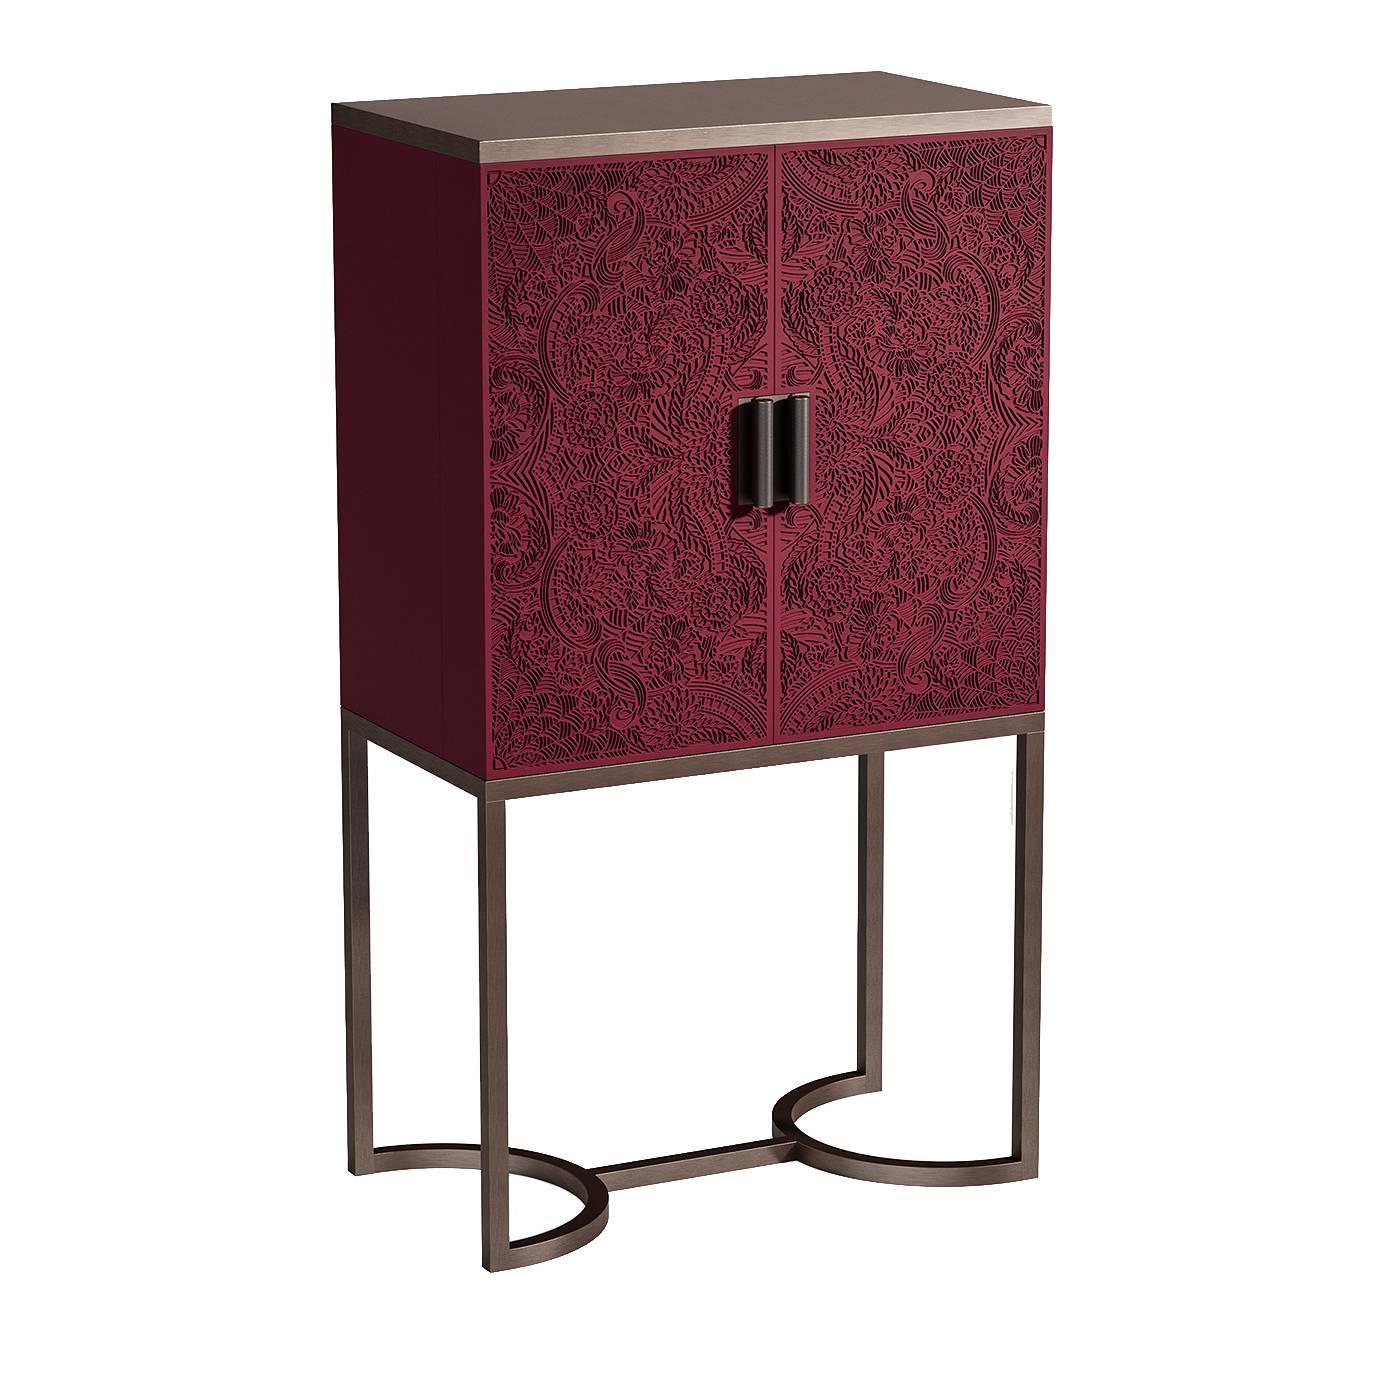 Part of the Bluemoon collection, this exquisite bar cabinet will elevate any dining room bar with its bold colors and modern lines. The square lacquered wood top features an eye-catching crimson color with paisley engravings and a velvet-like